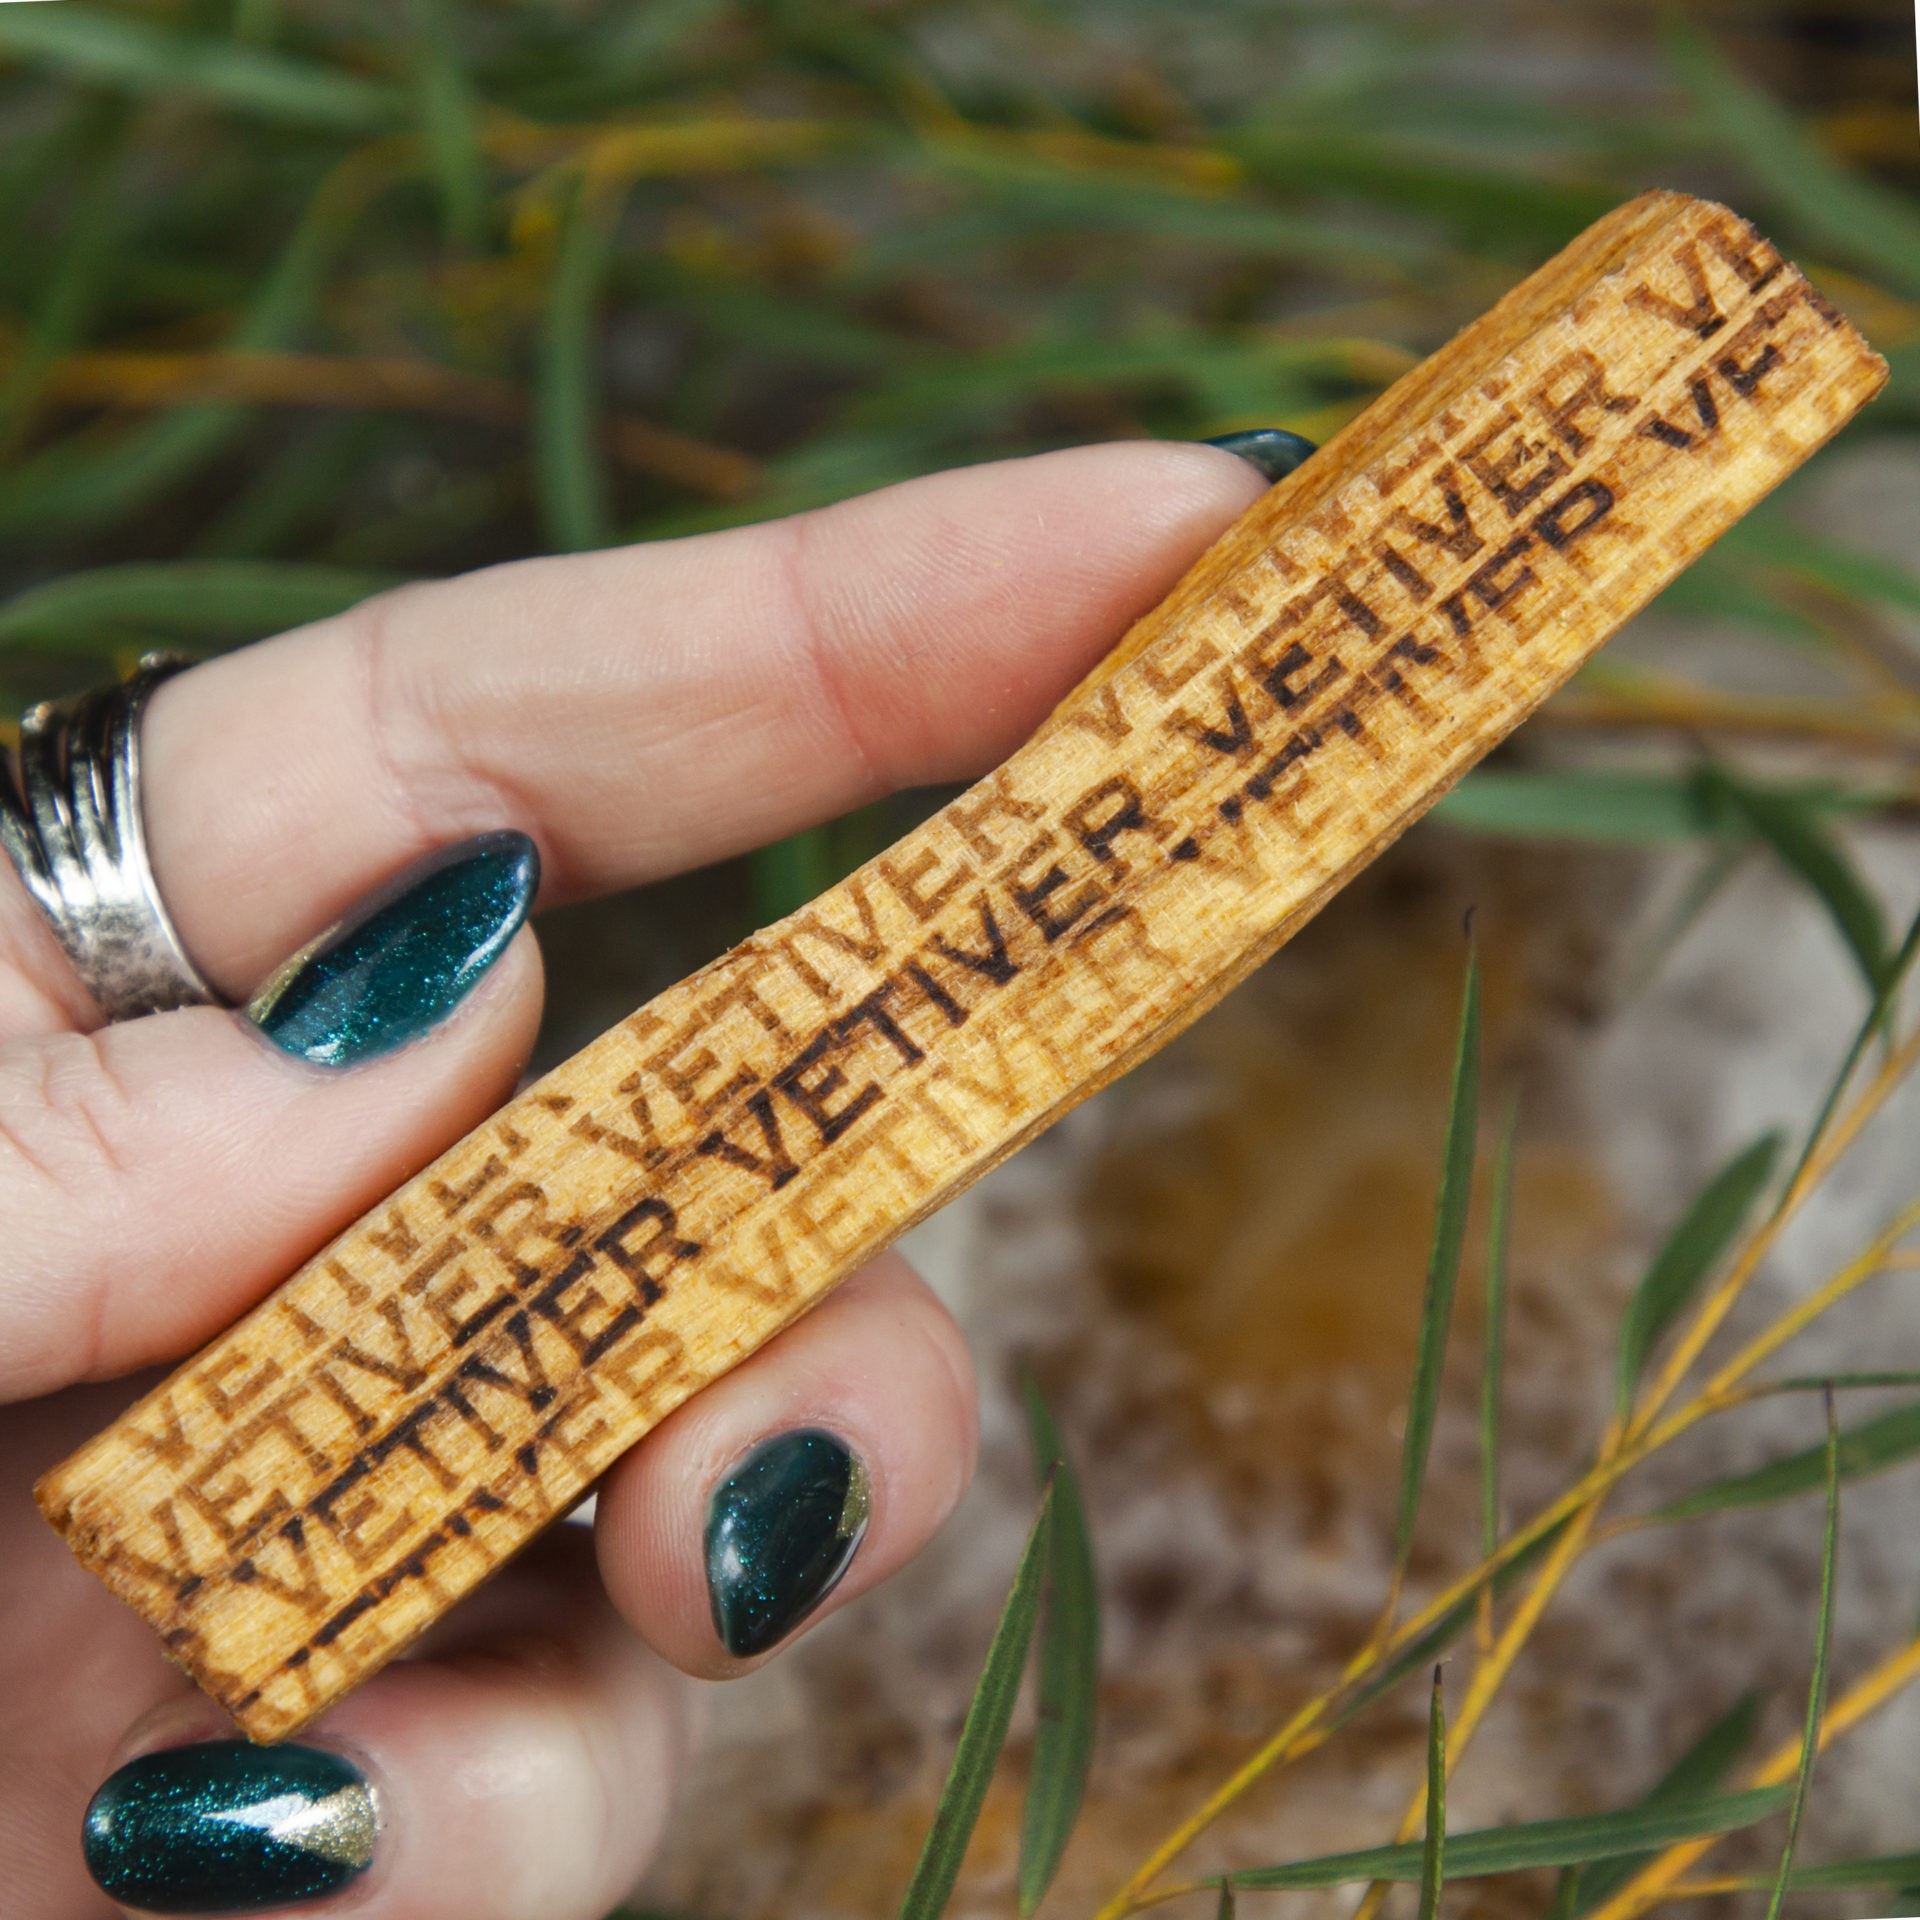 Palo Santo Essential Oil at the Dreaming Goddess